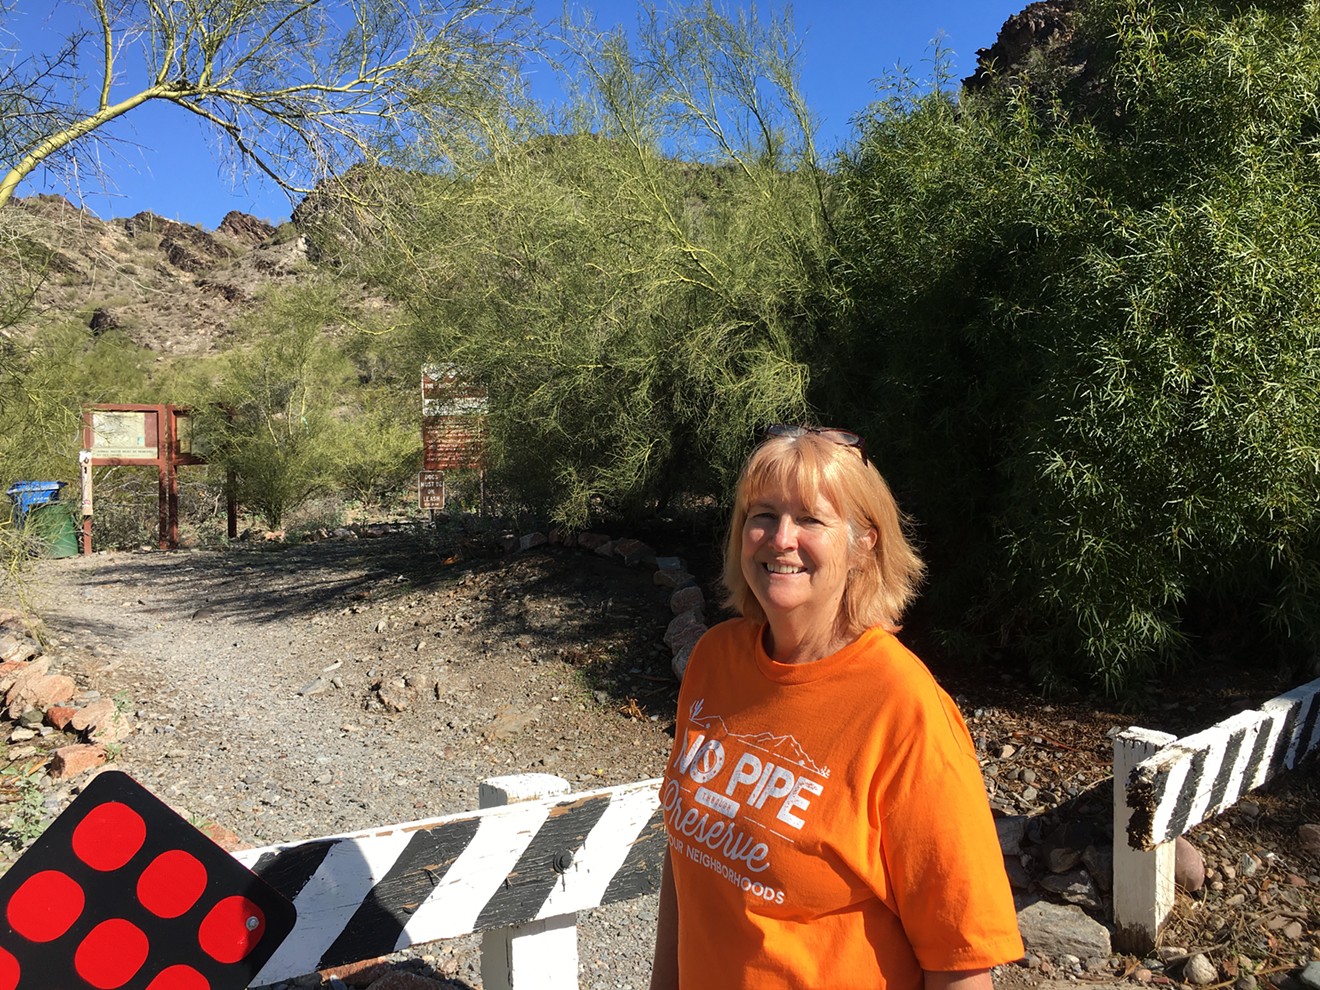 Katherine Roxlo at an entrance to the Phoenix Mountain Preserve, not far from her home in Madison Heights.